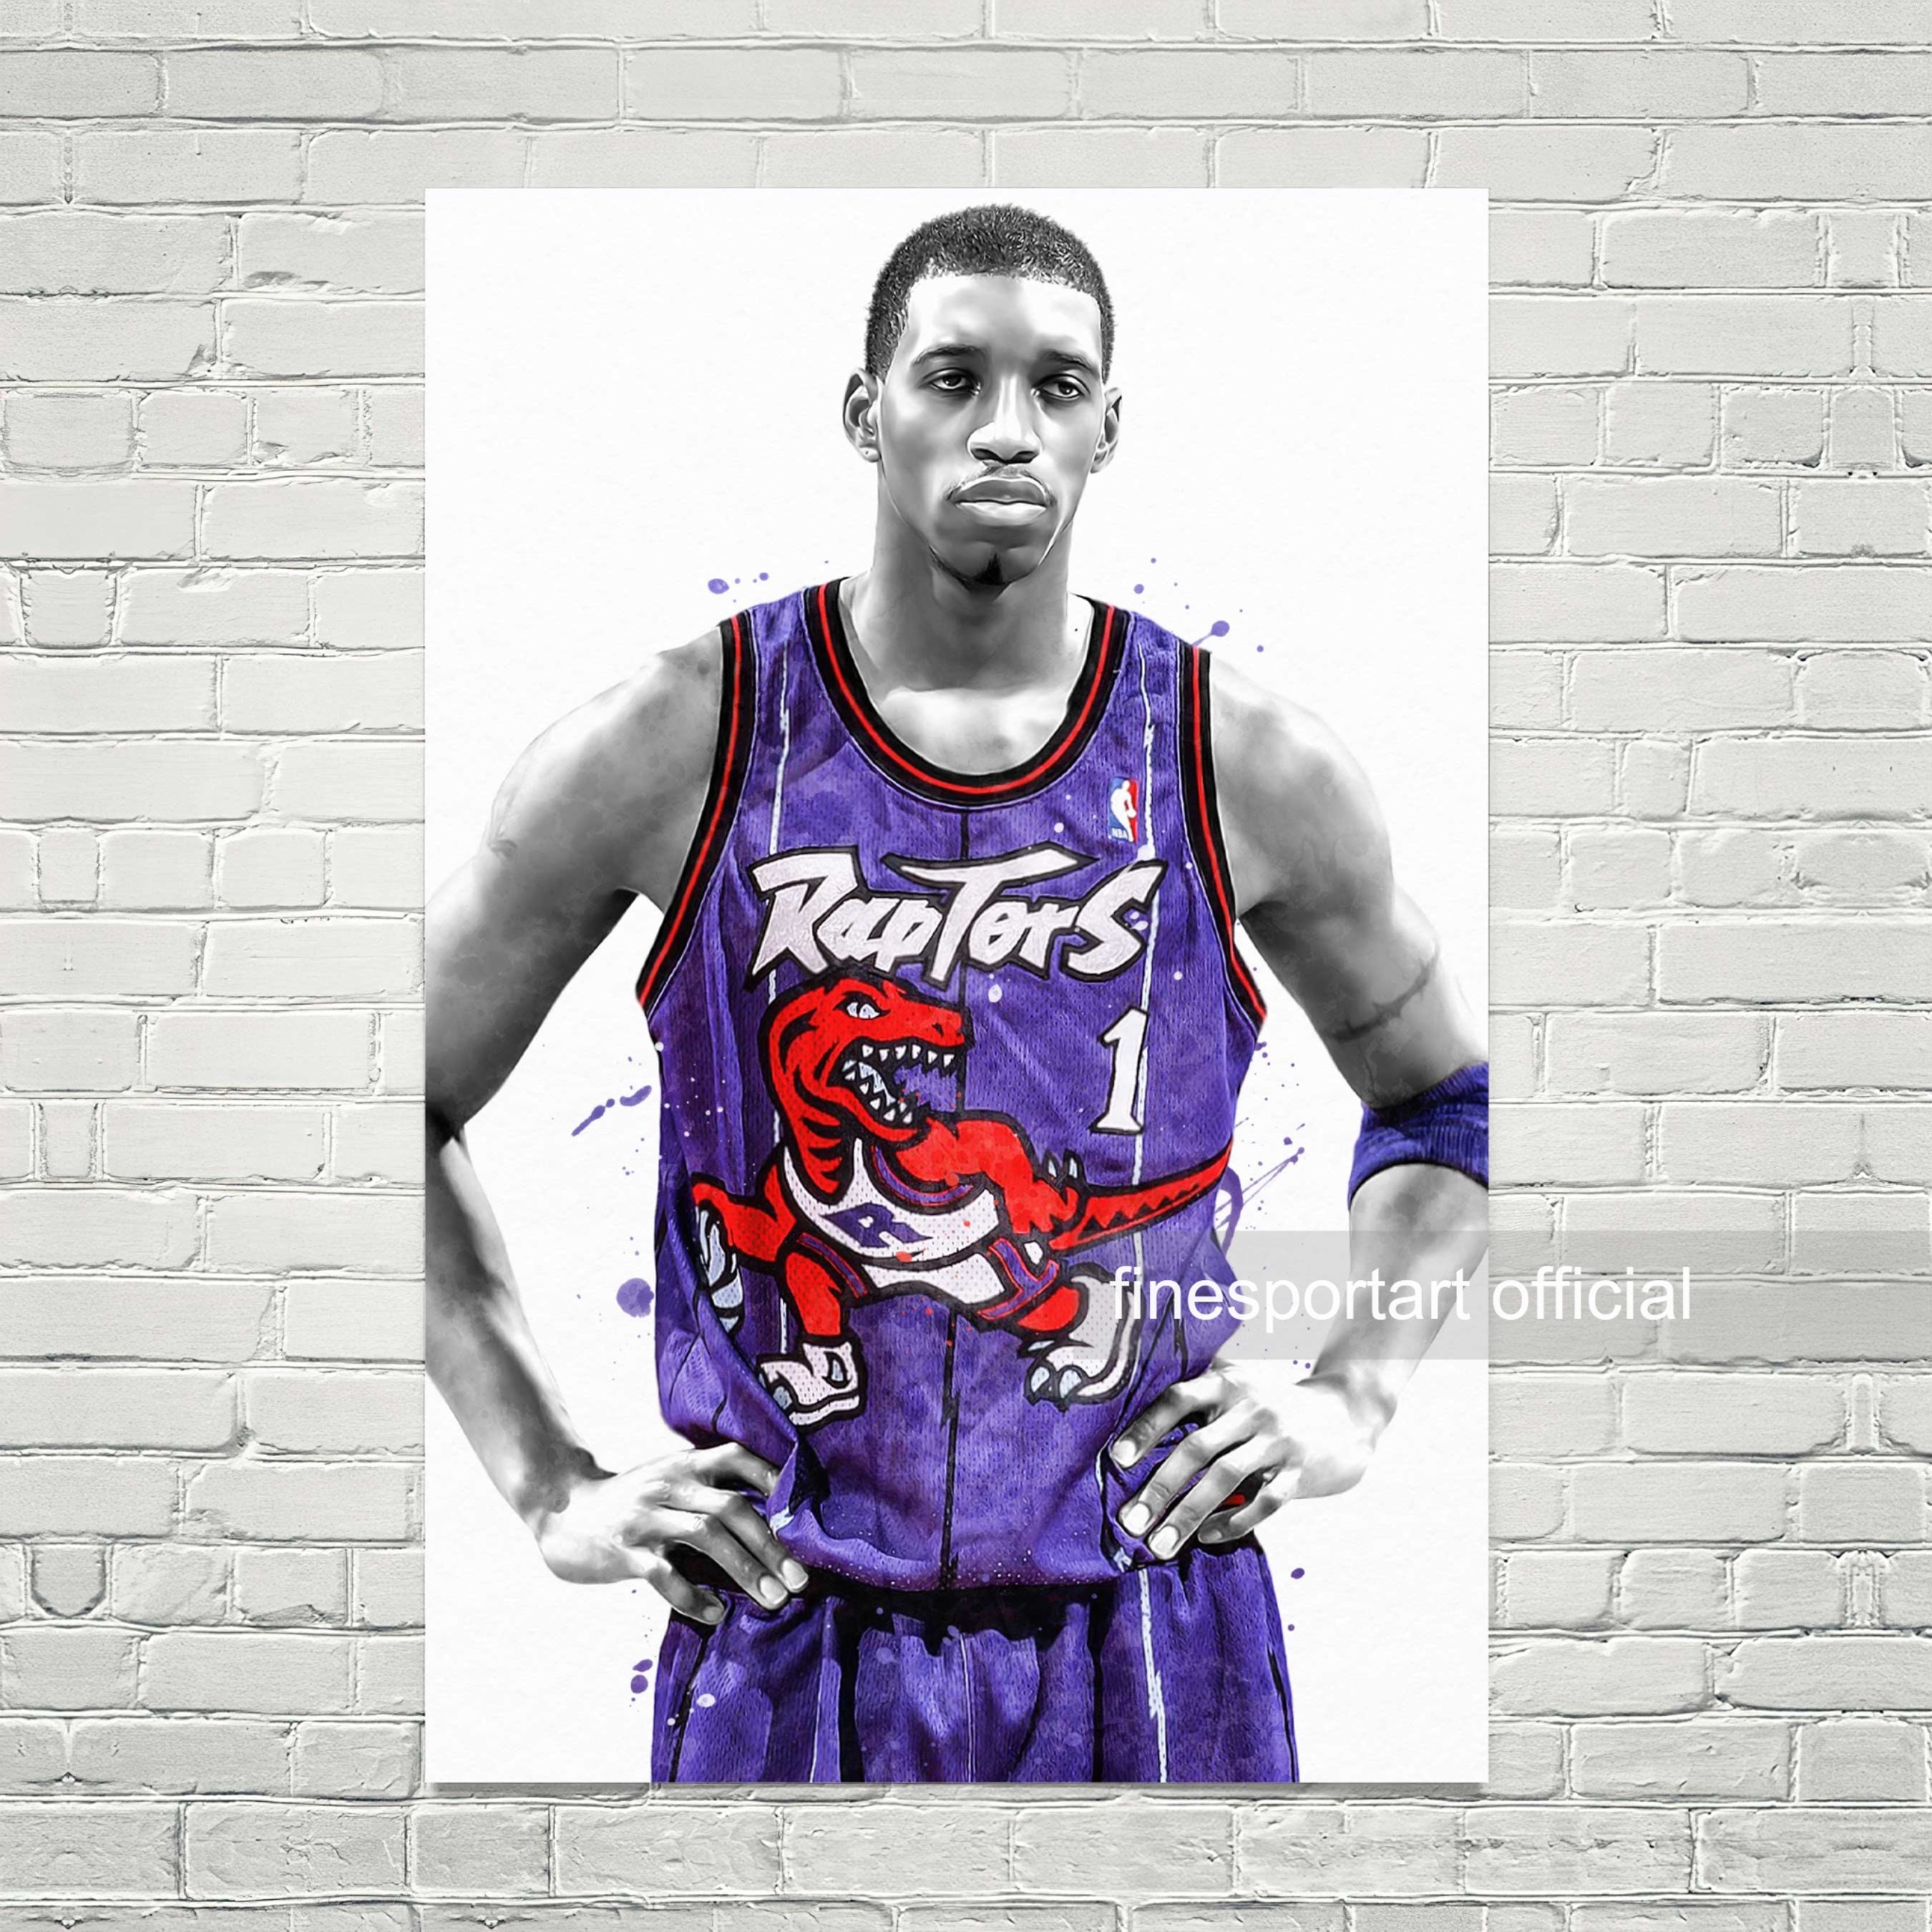 Vince Carter and Tracy McGrady Poster for Sale by SandyLawalSL